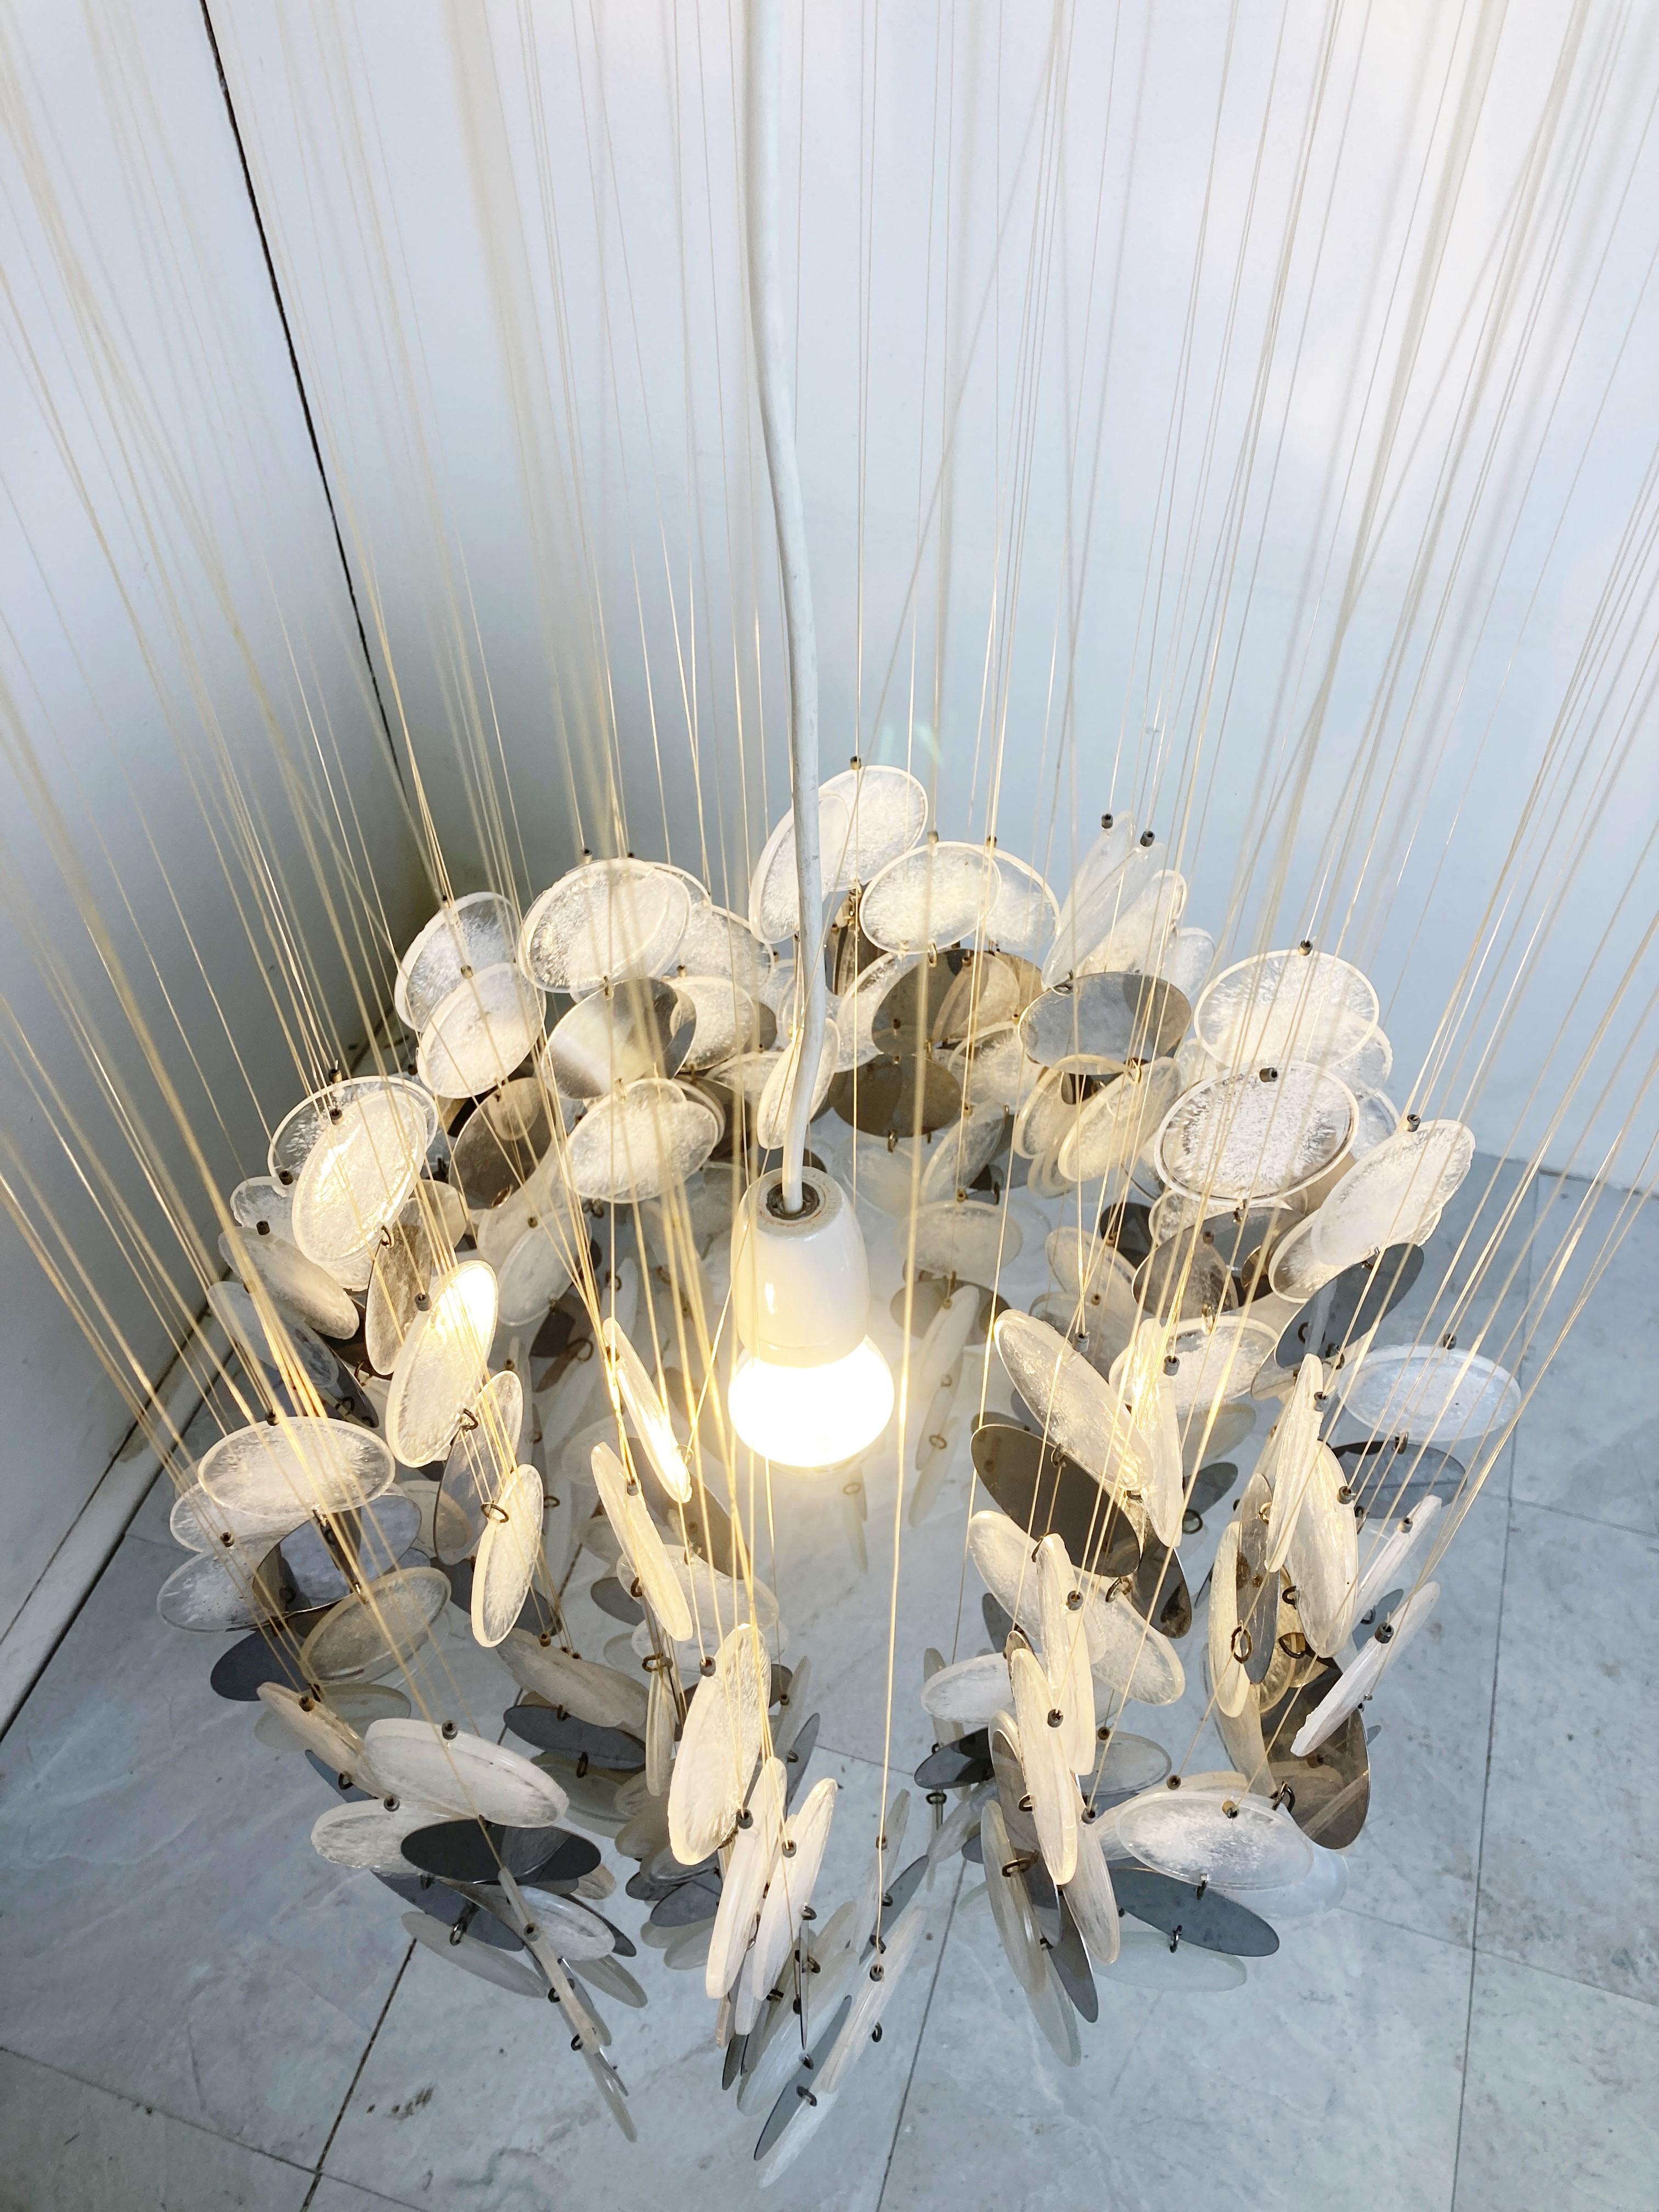 Spectacular chandelier with lots of smoked and white Italian glass discs.

Most of these chandeliers where made with mother of pearl, but these are completely in glass, which is rare.

The chandelier emits a stunning light.

1970s -